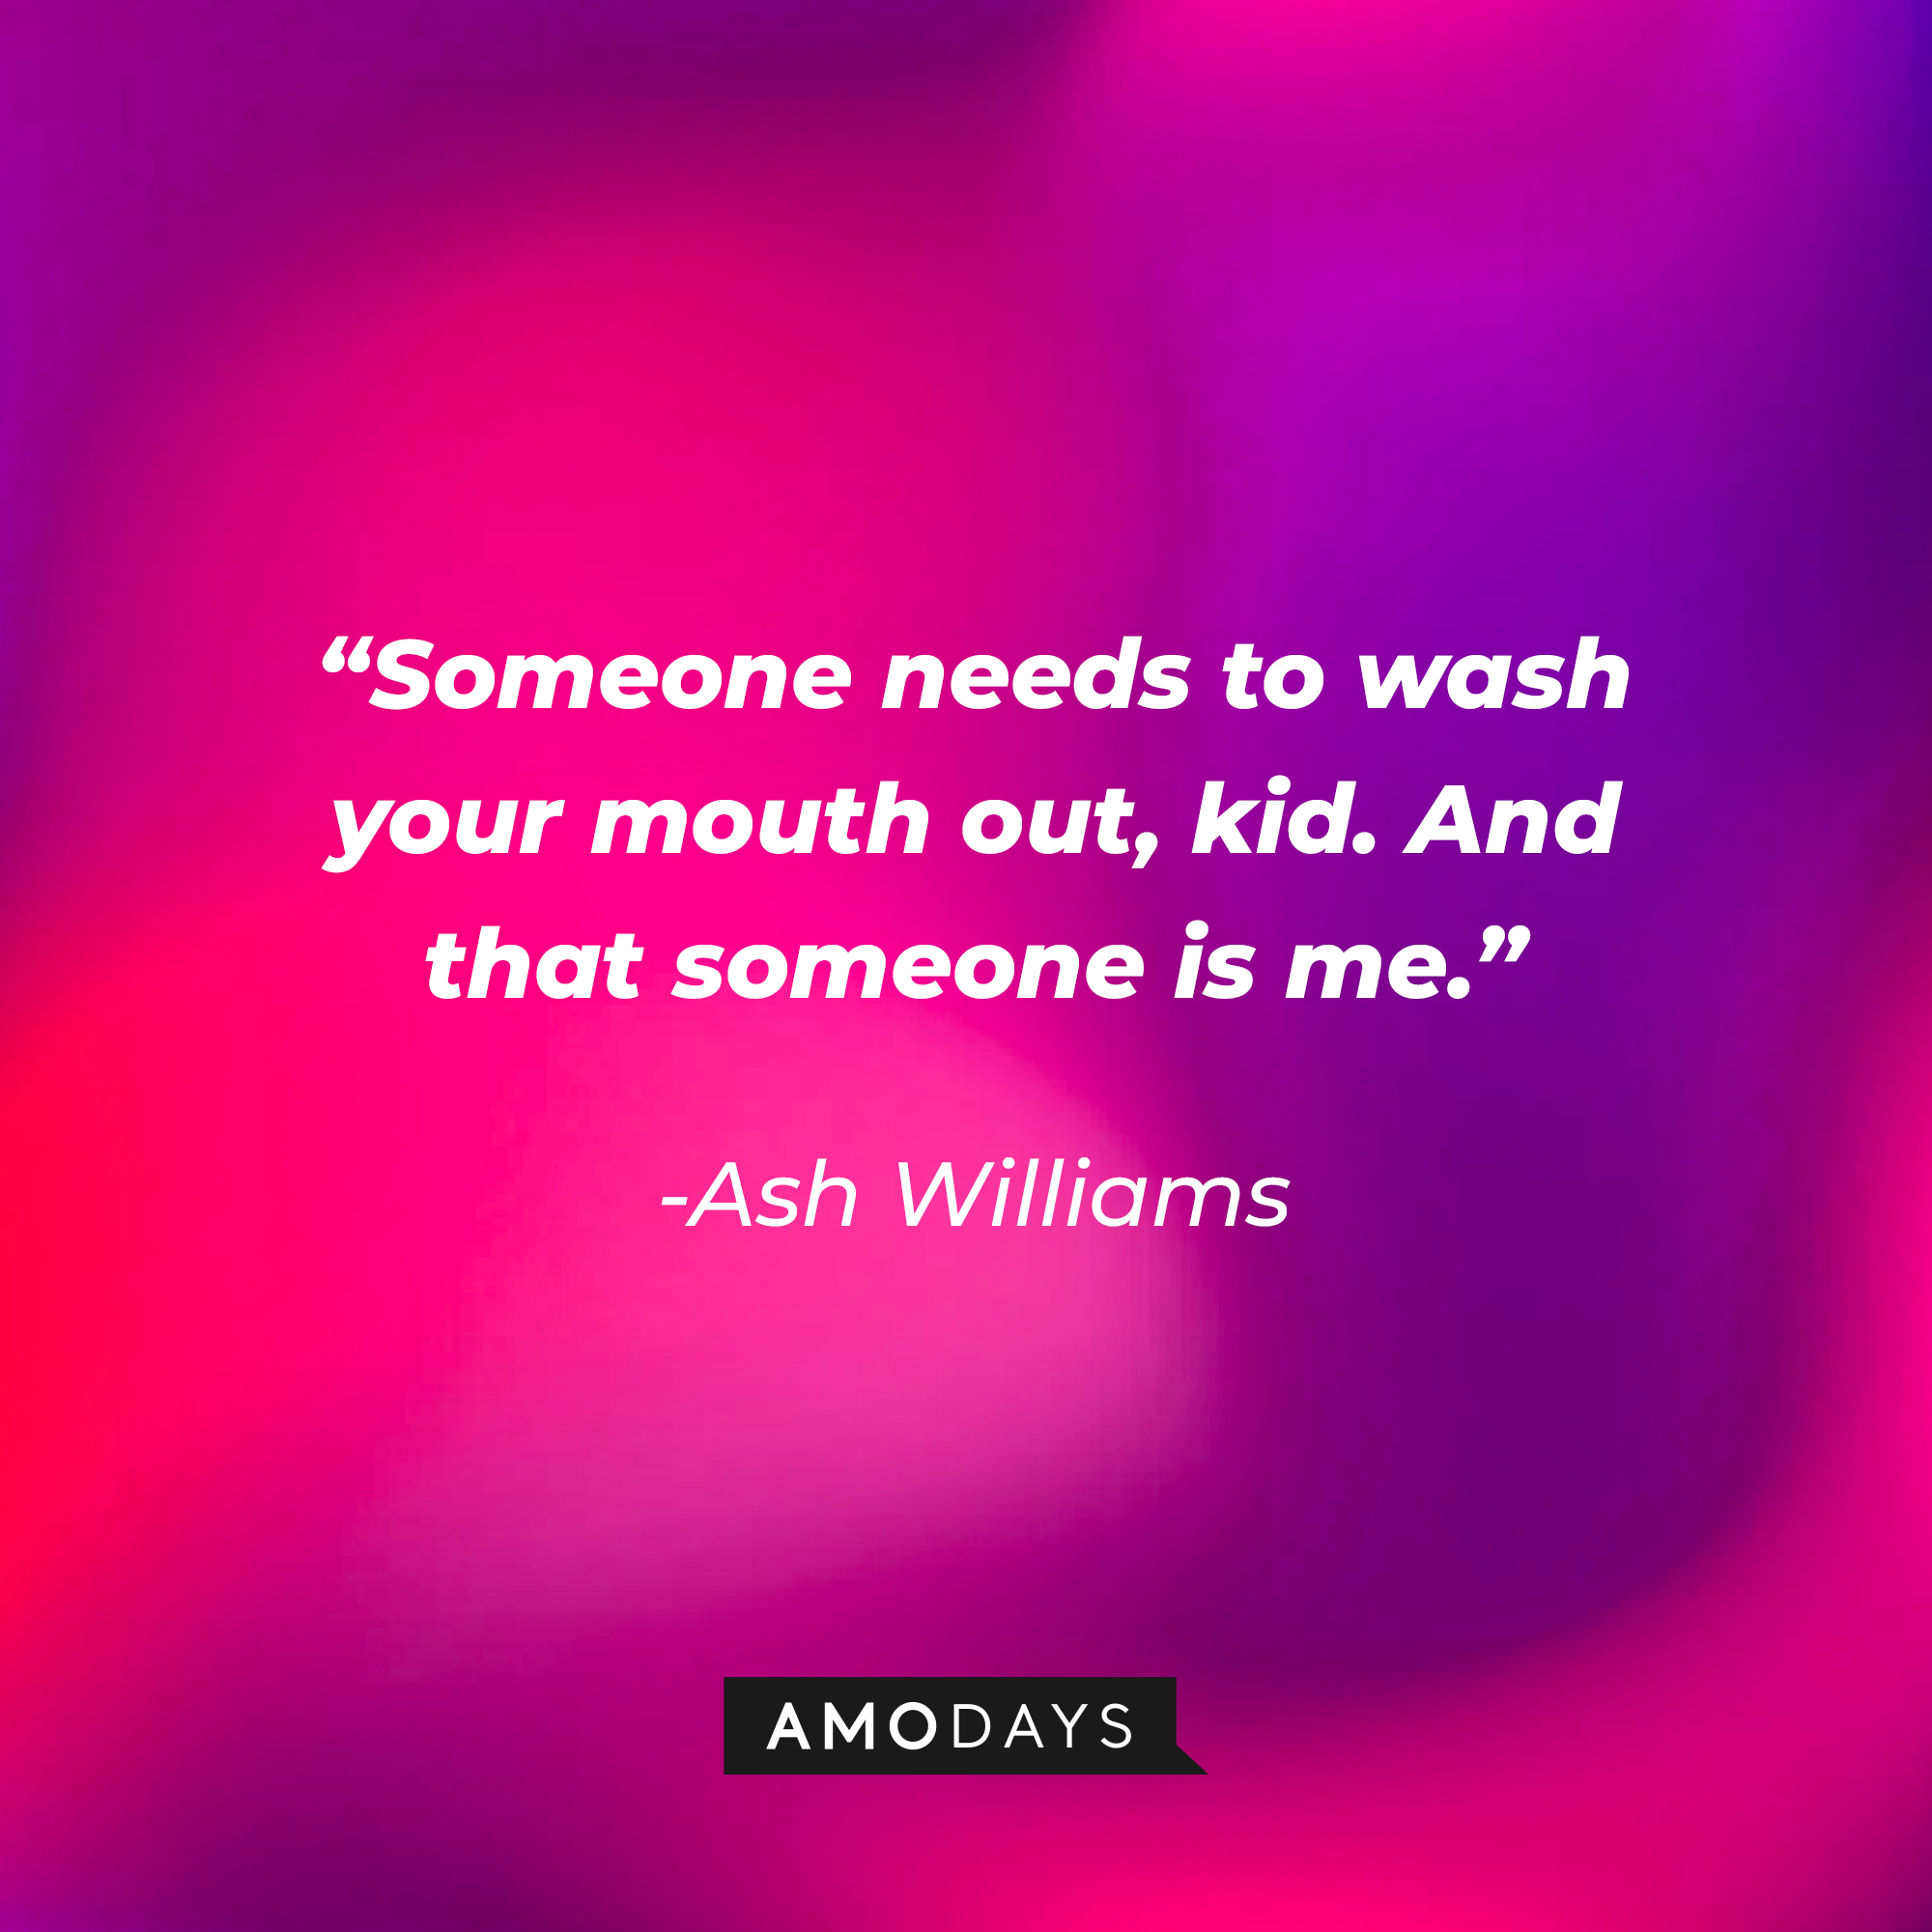 Ash Williams' quote: “Someone needs to wash your mouth out, kid. And that someone is me.” | Source: Amodays